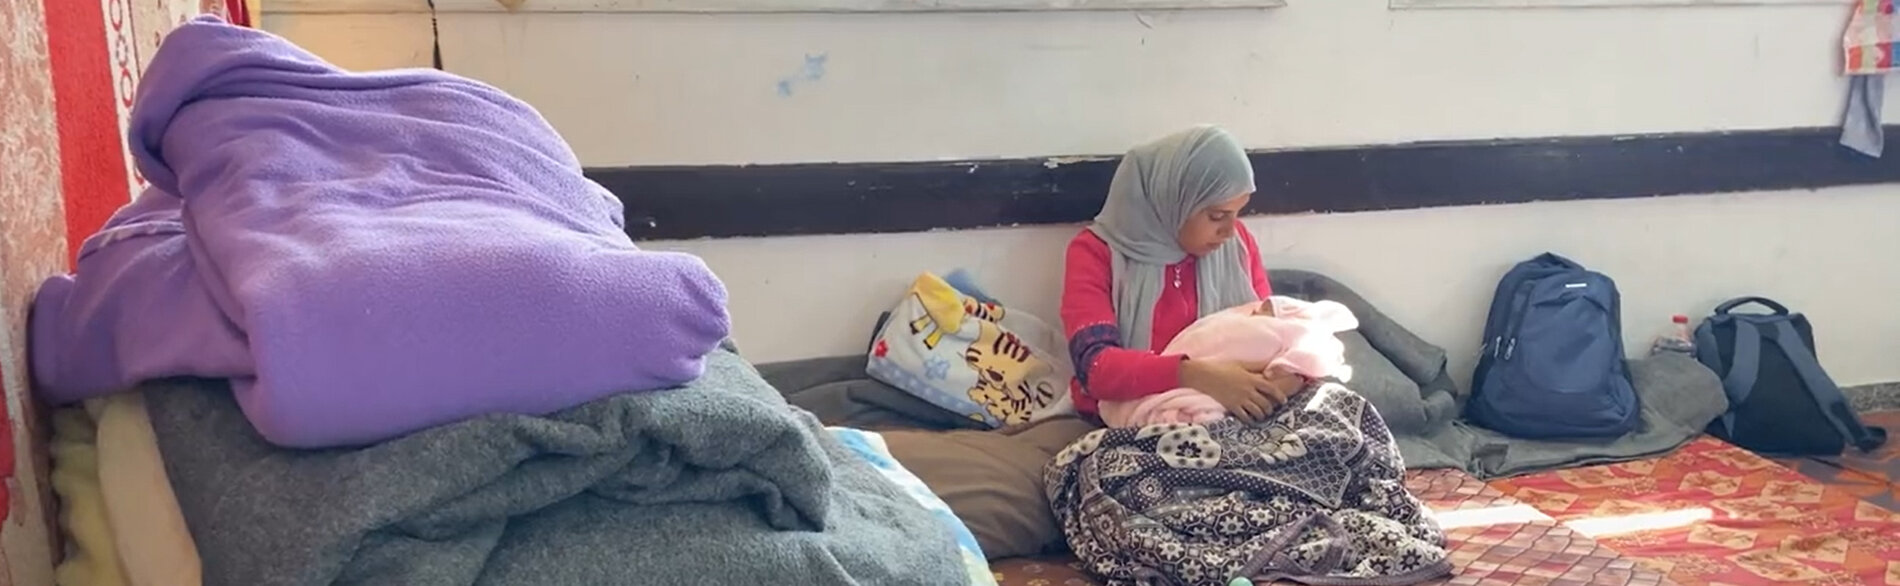 Palestinian mother and her newborn baby girl in a school used to shelter displaced people in the Gaza Strip. "There is no bathroom, no water, and no proper care,” she says. ”I have not checked or cleaned the caesarean section stitches yet.” Screenshot from a video by UNICEF